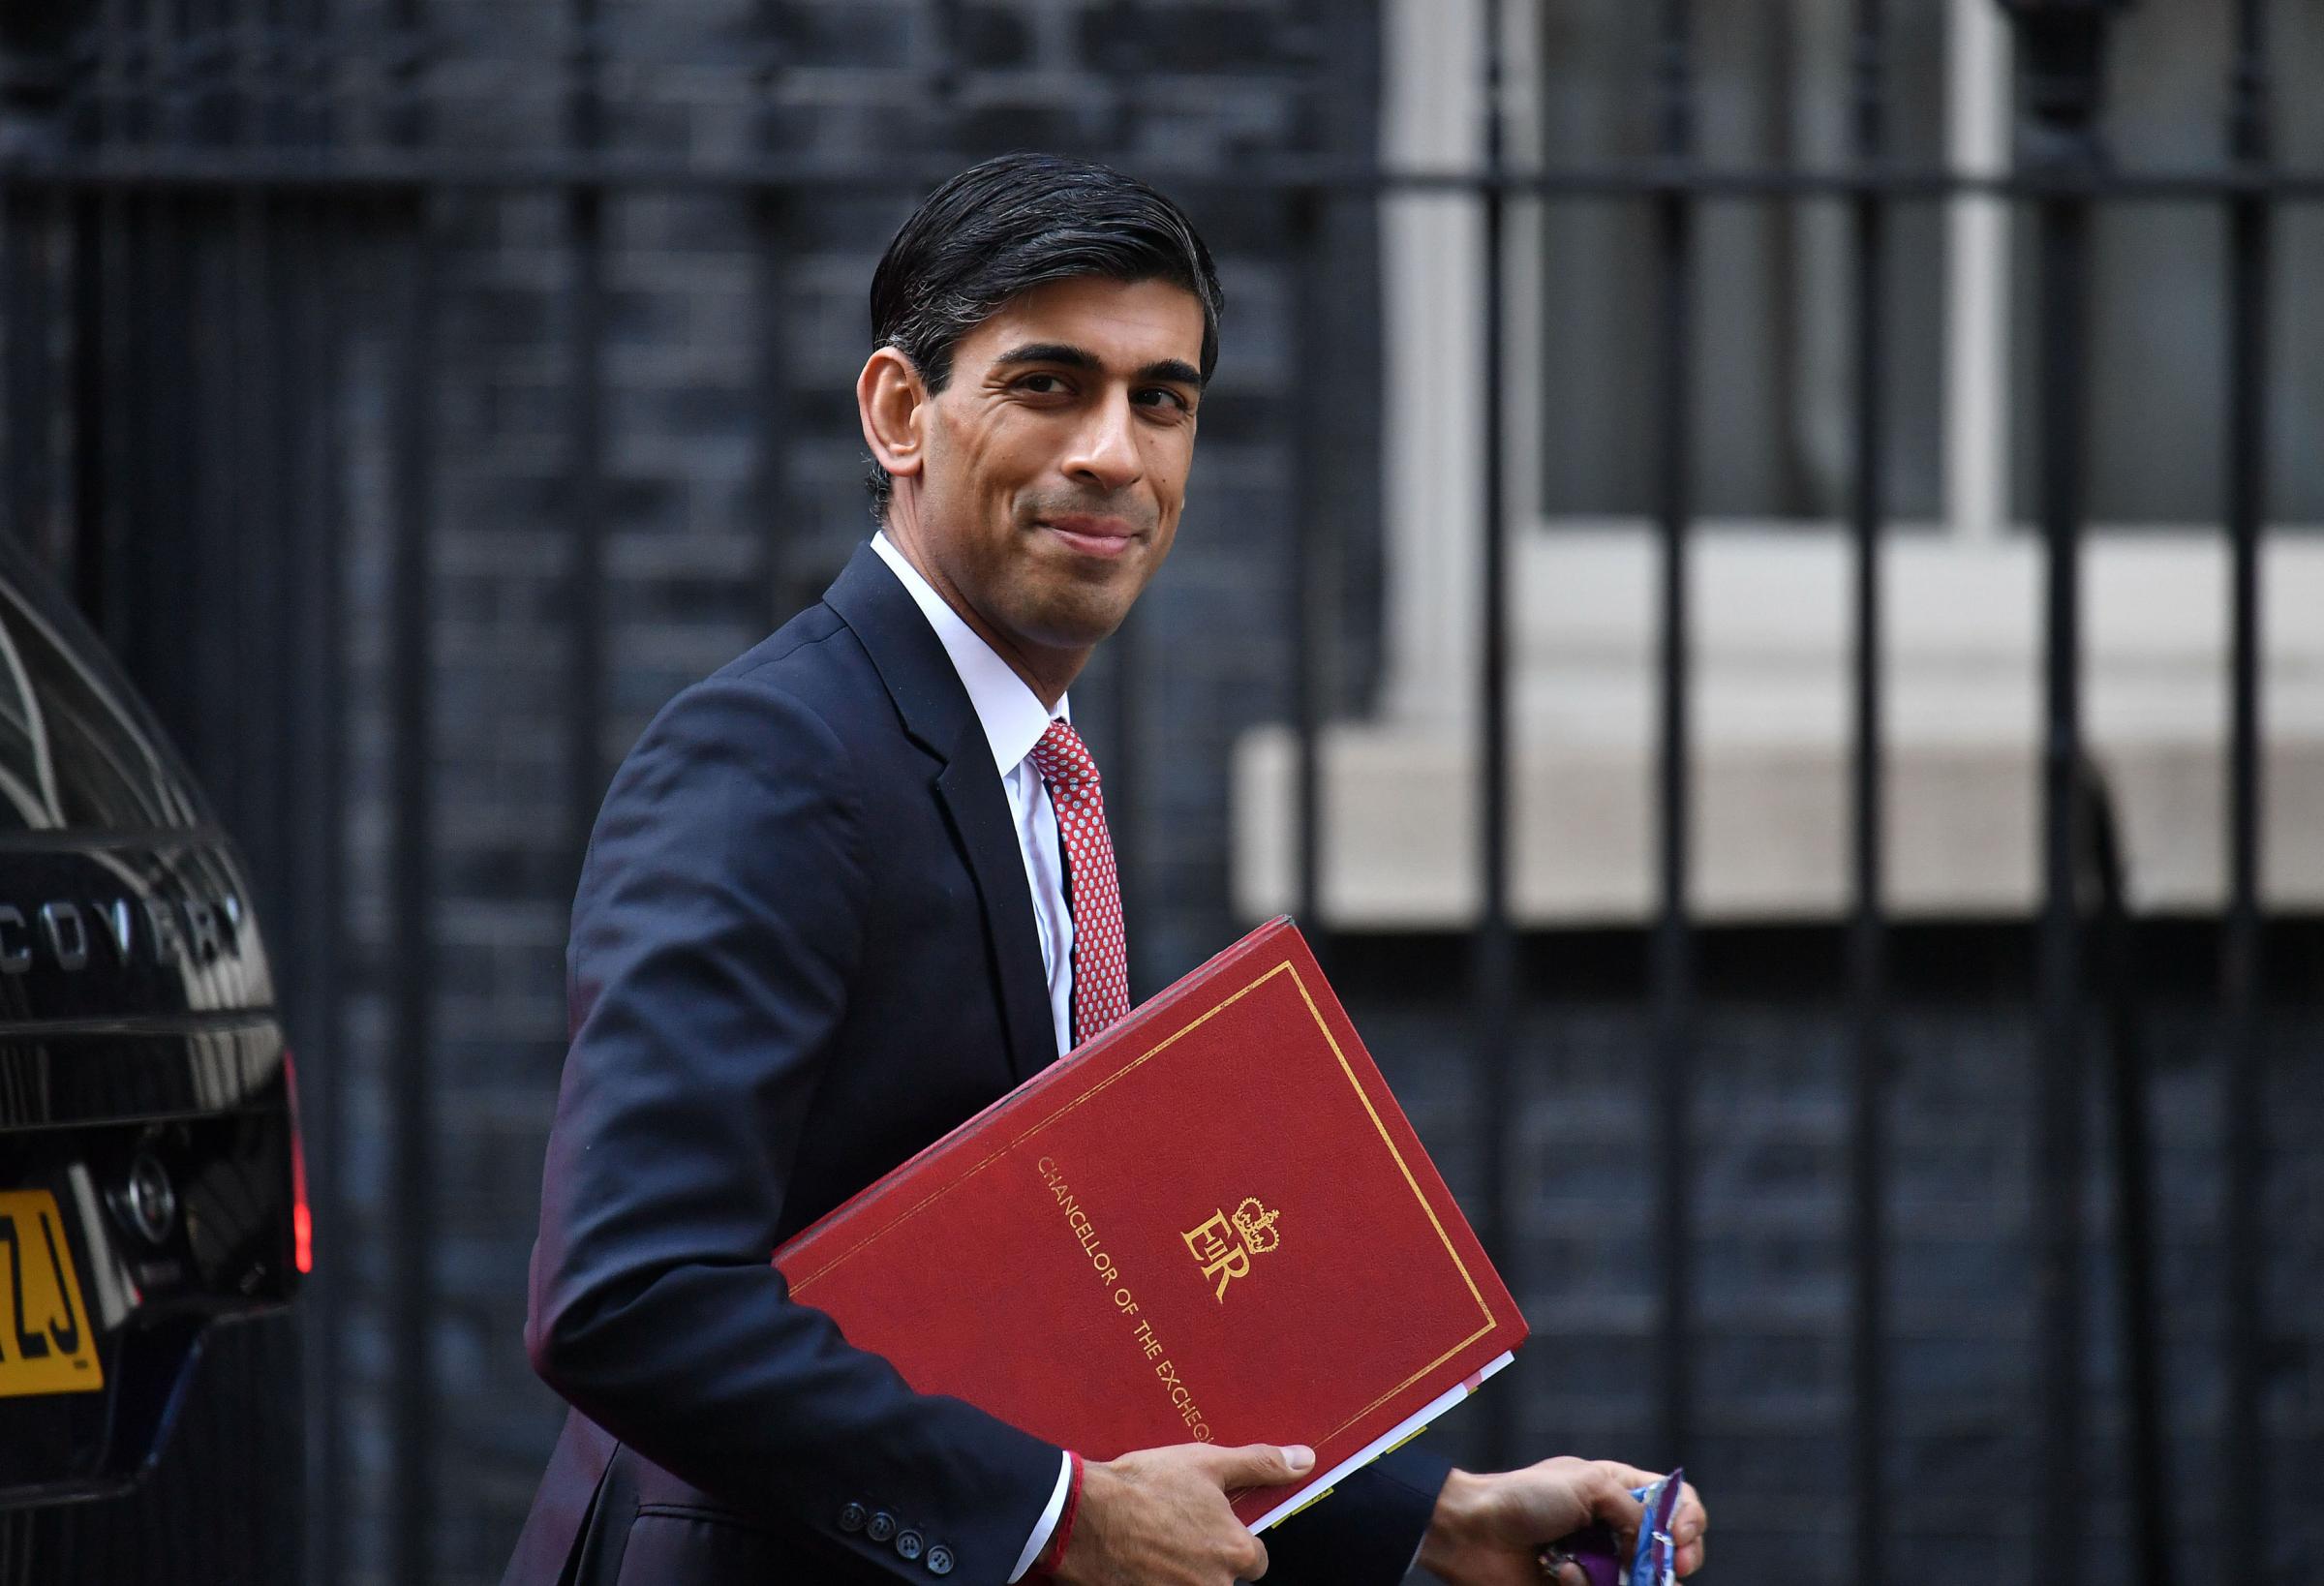 Benefits cap 'must be scrapped', poverty campaigners tell Rishi Sunak